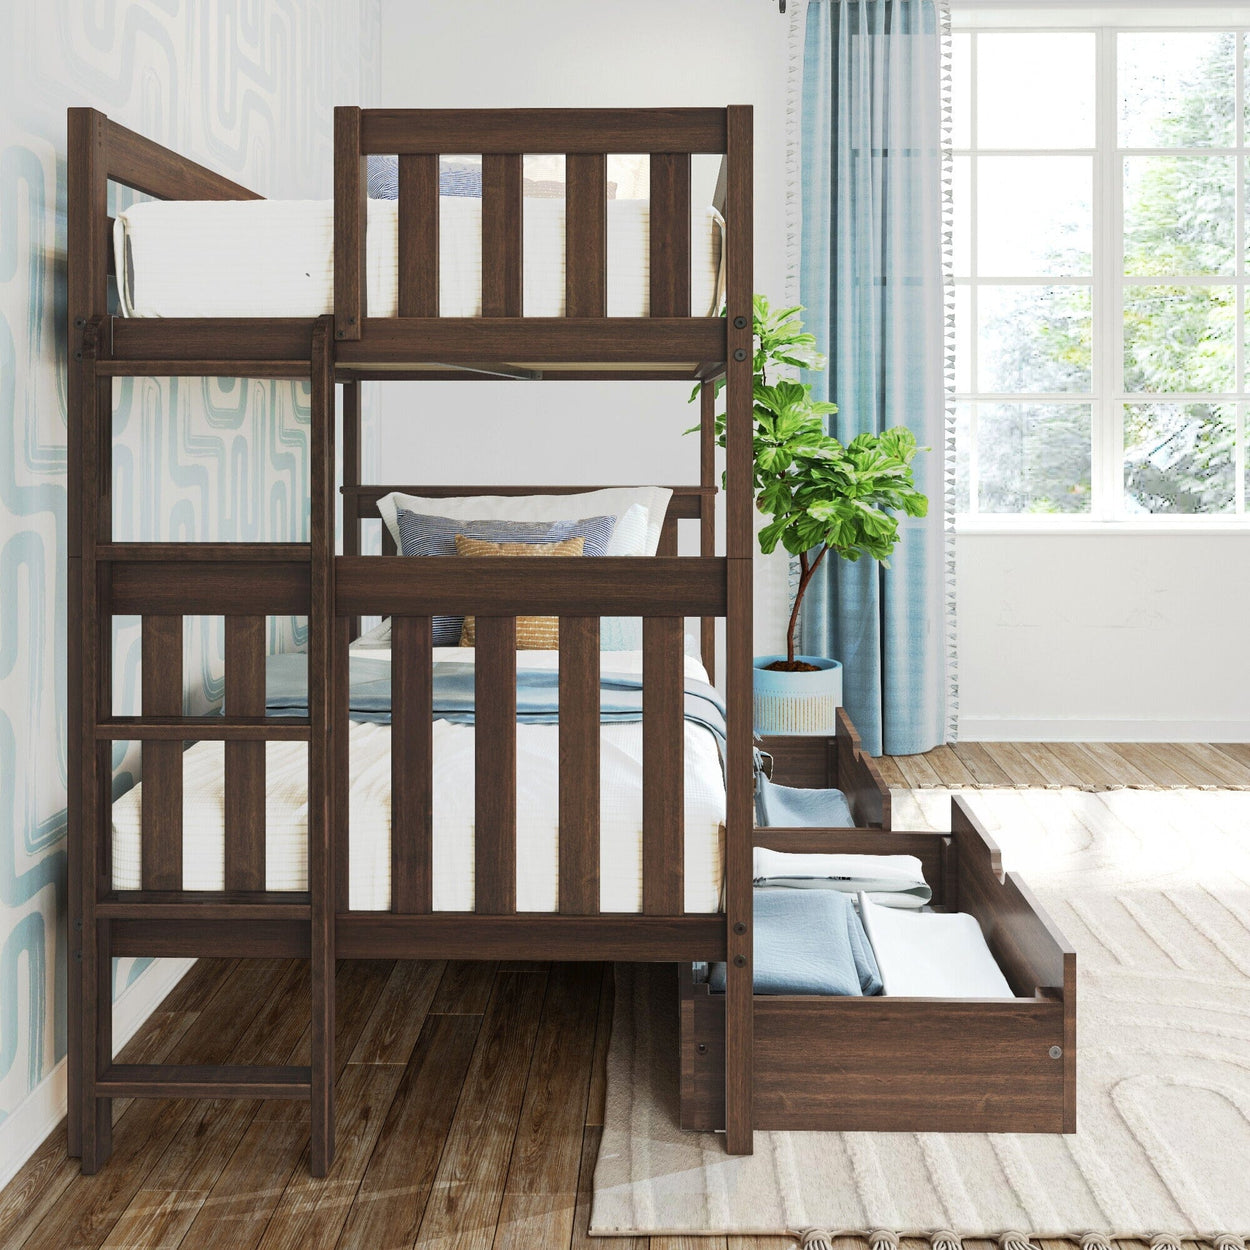 187305-008 : Bunk Beds Twin over Twin Bunk Bed with Ladder on End and Storage Drawers, Walnut